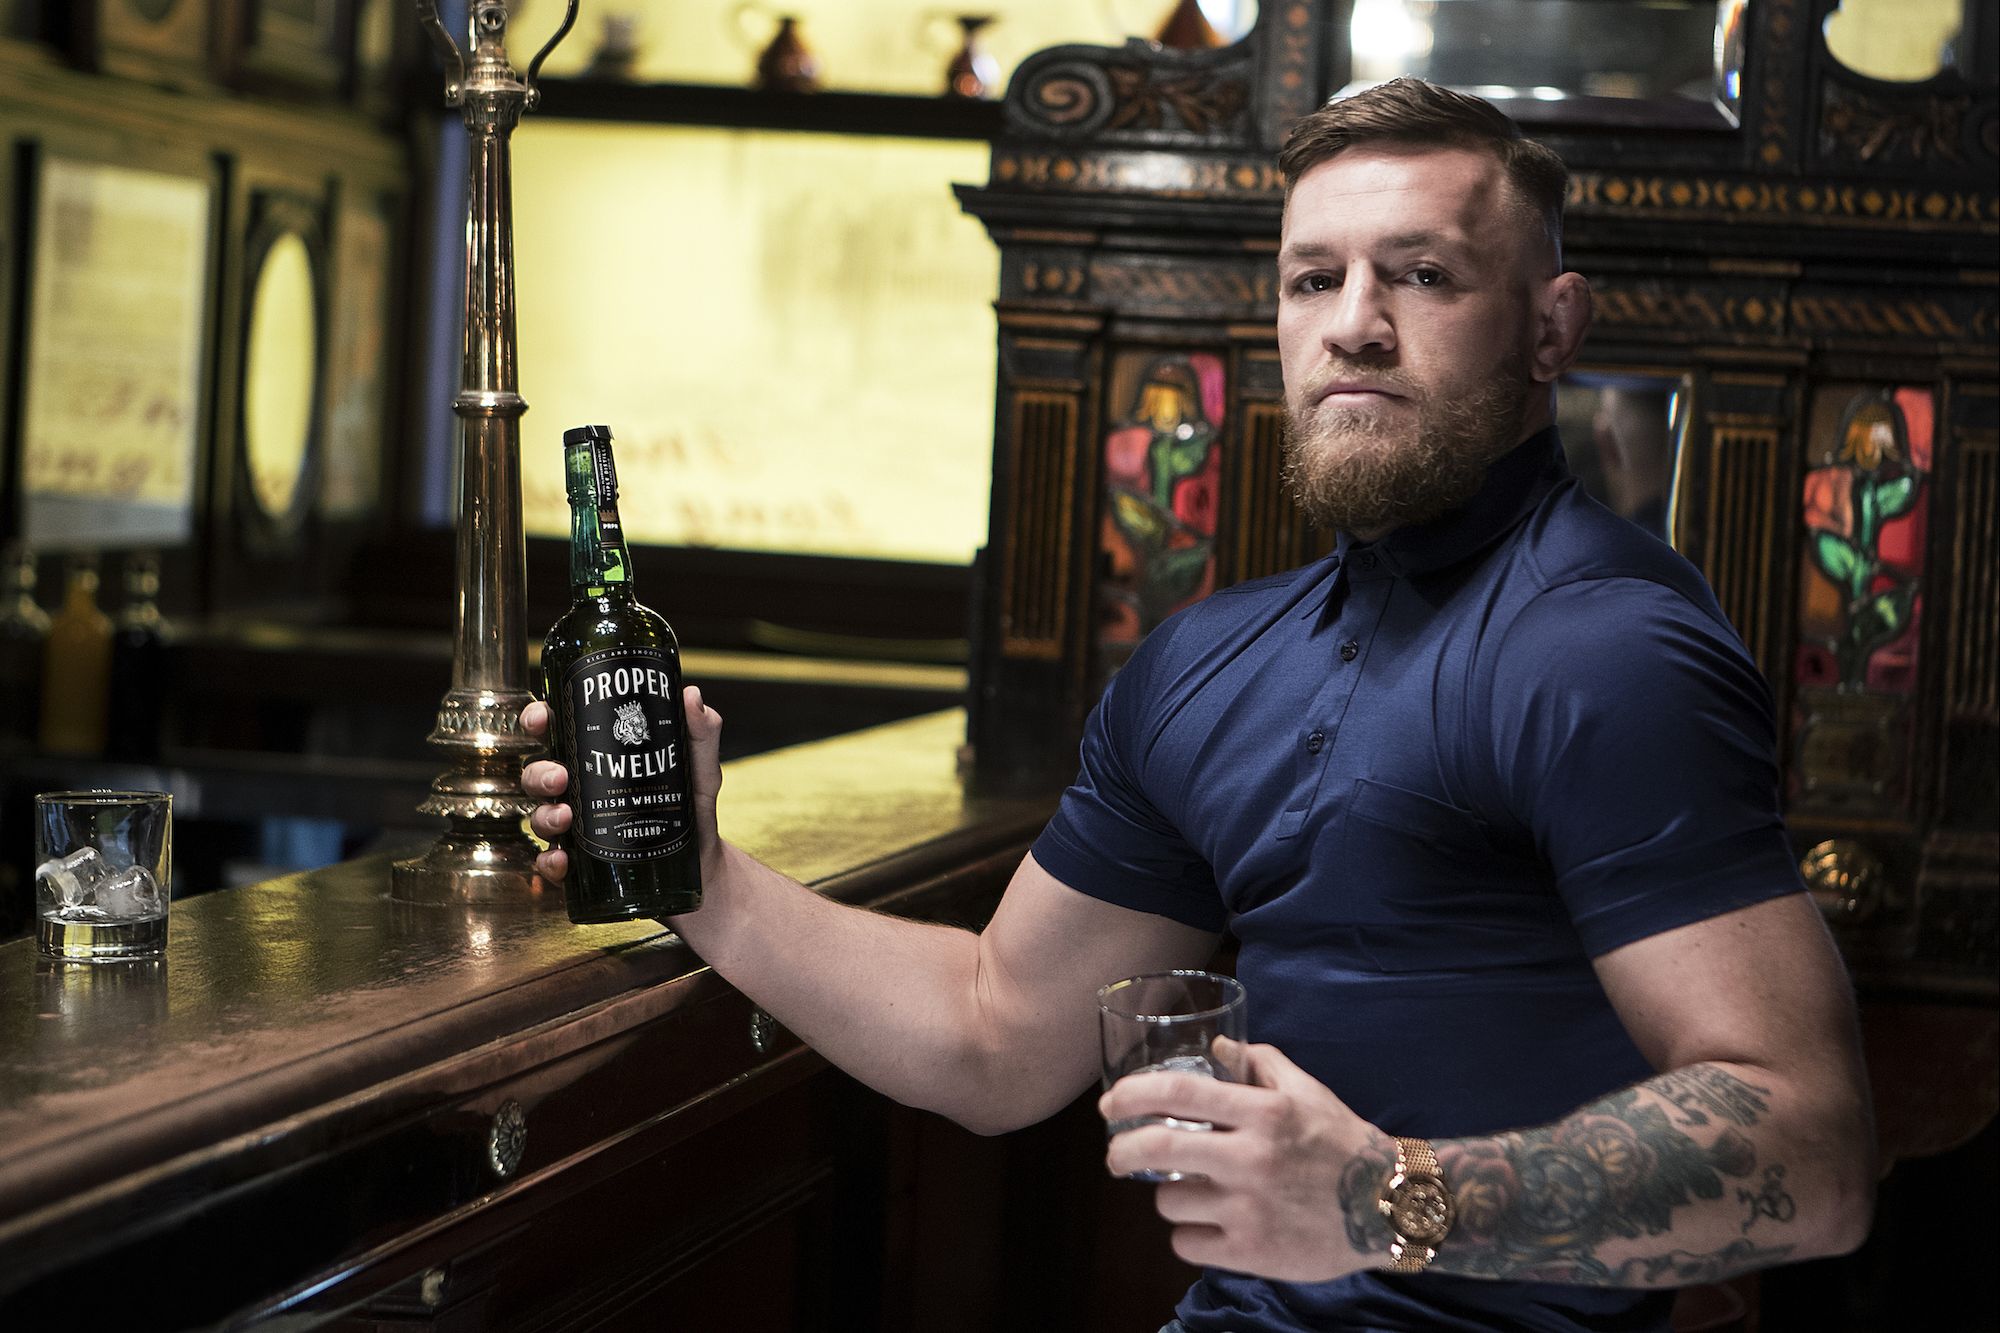 MMA star McGregor may have to change his whiskey’s name